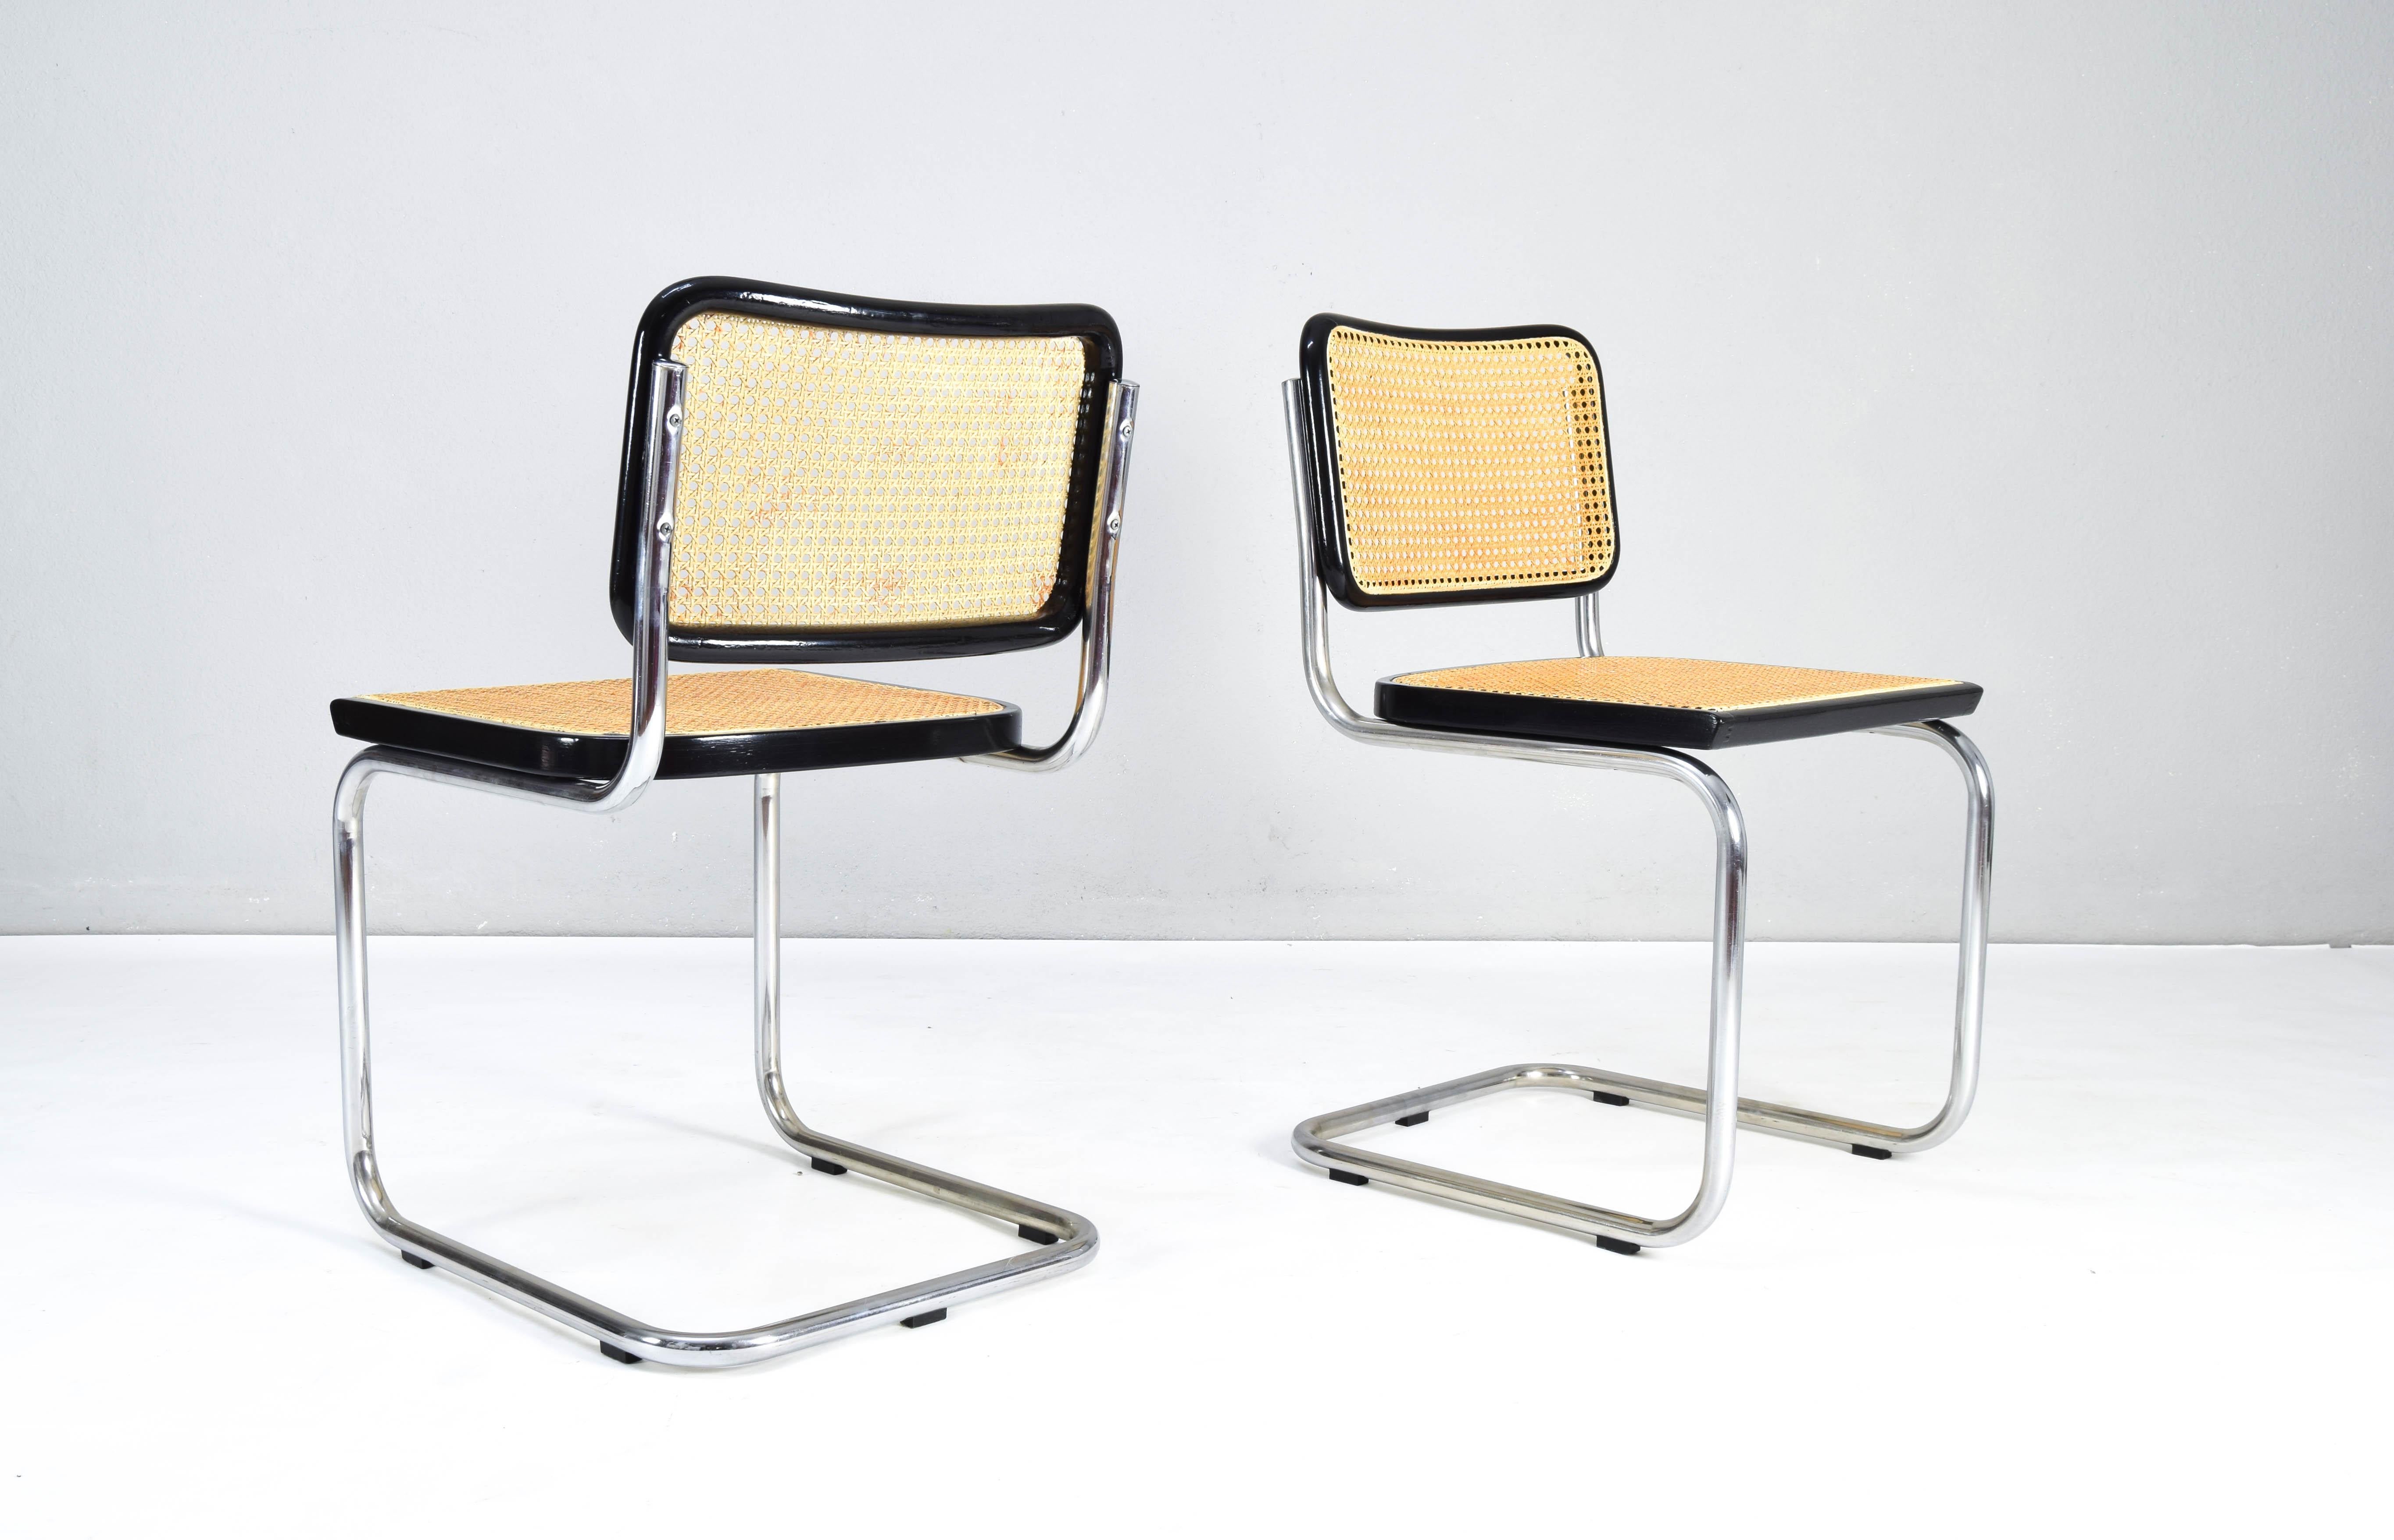 Italian Set of Two Mid-Century Modern Marcel Breuer B32 Cesca Chair, Italy 1970s For Sale